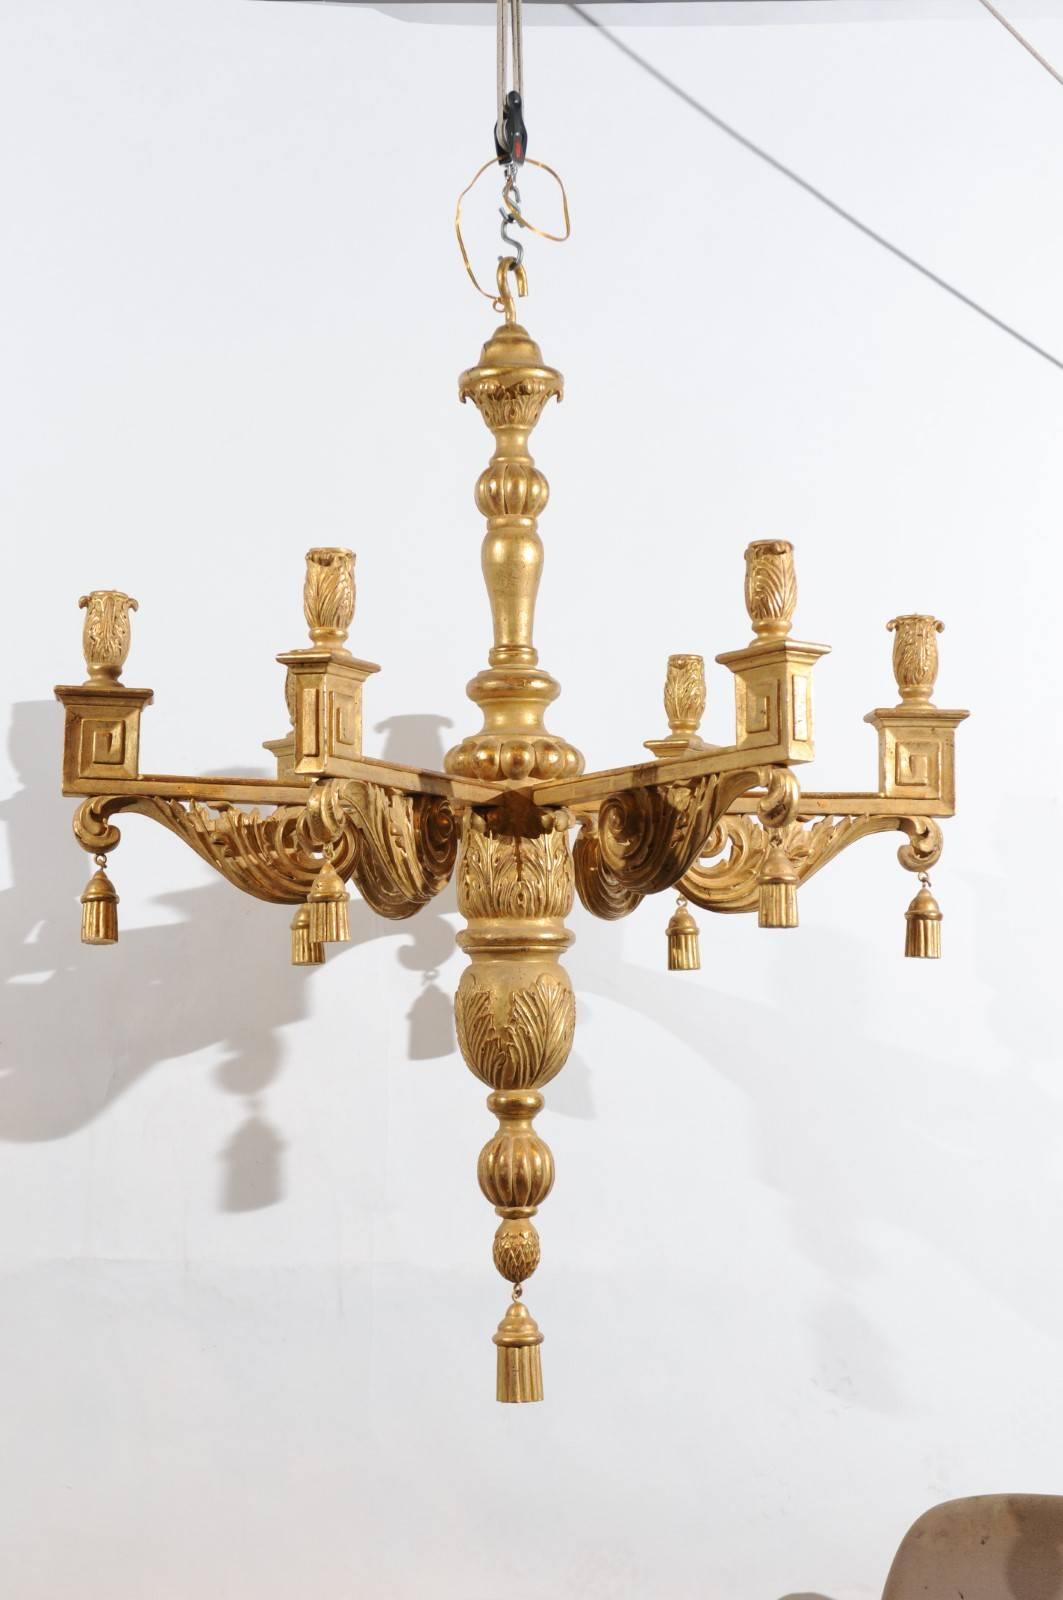 Large giltwood Neoclassical style chandelier with Tassels & 6 lights.